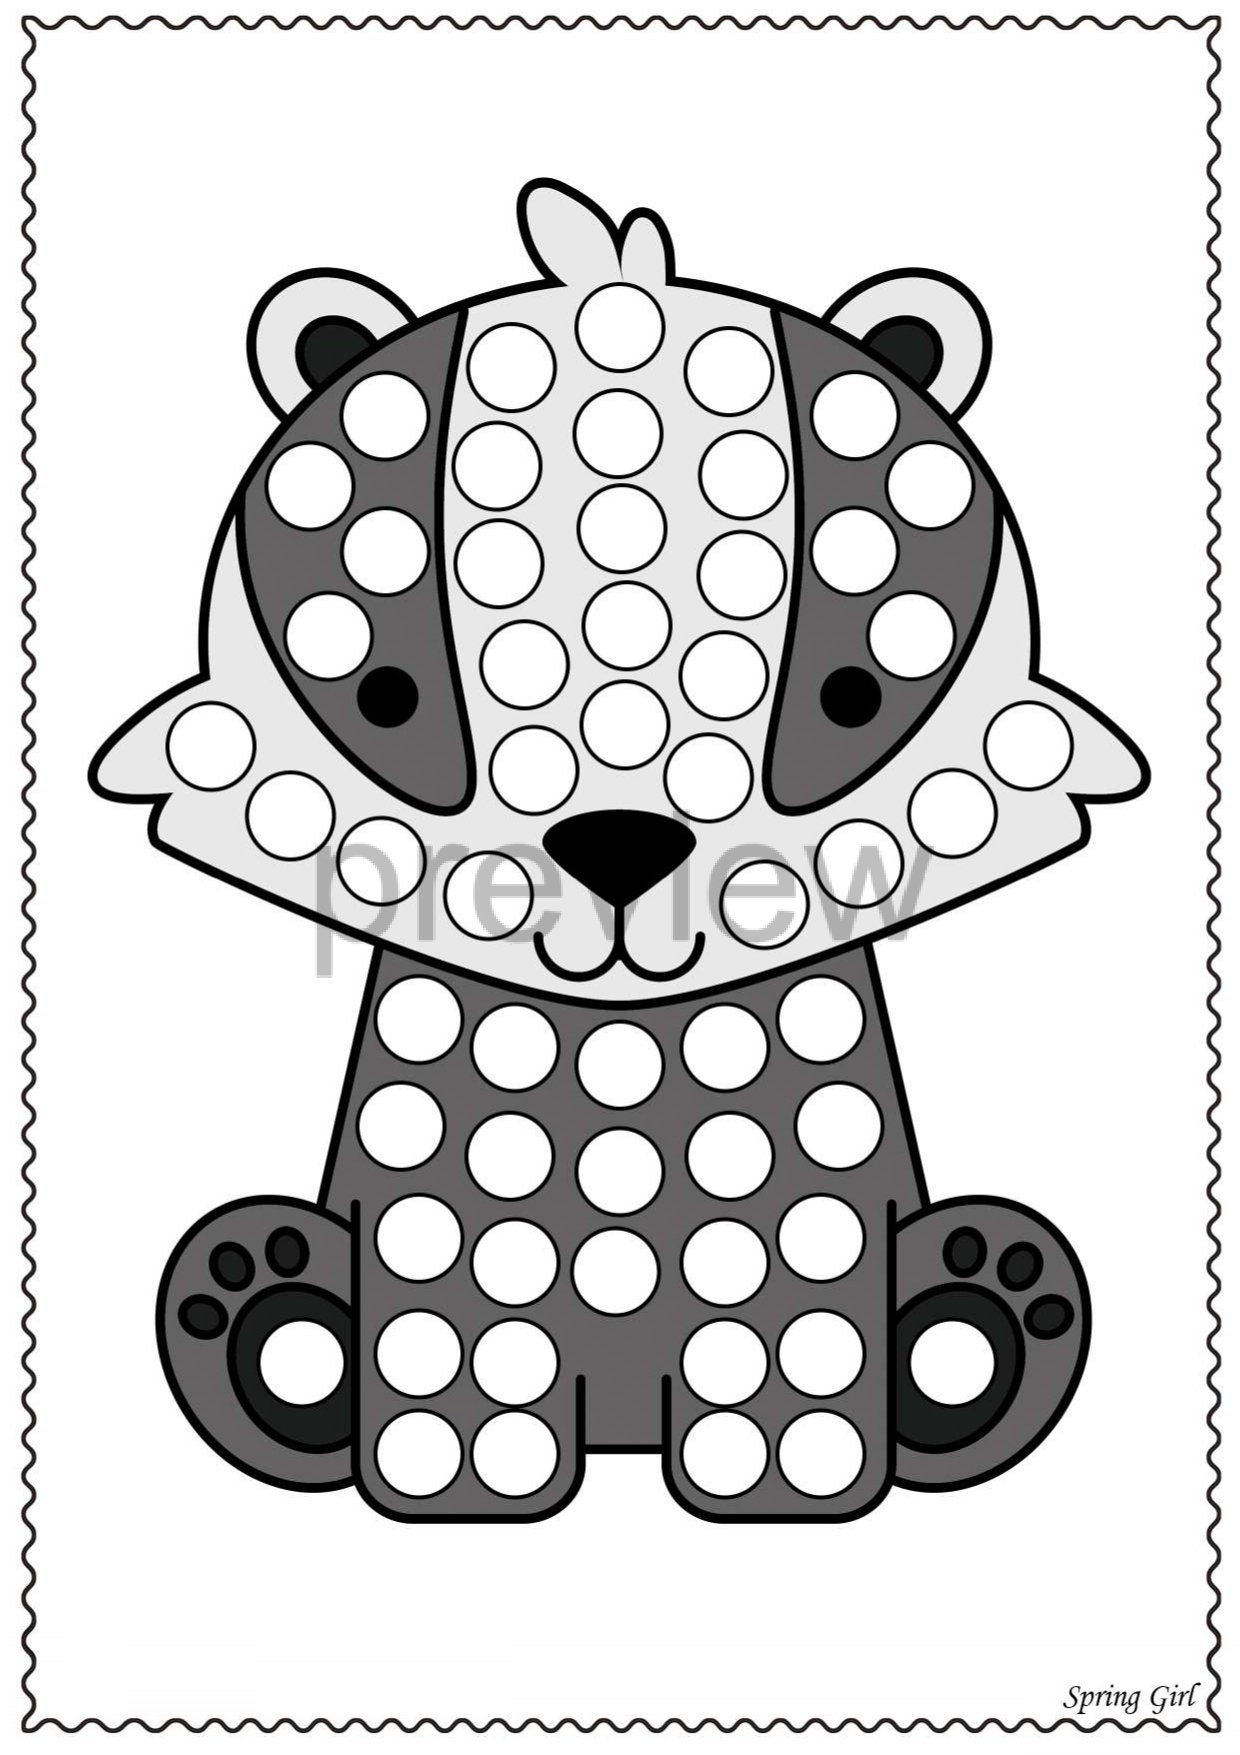 ANIMALS DOT MARKERS Book for Kids Ages 4 - 8: With Animals Coloring Pages  BONUS by Leolele Press